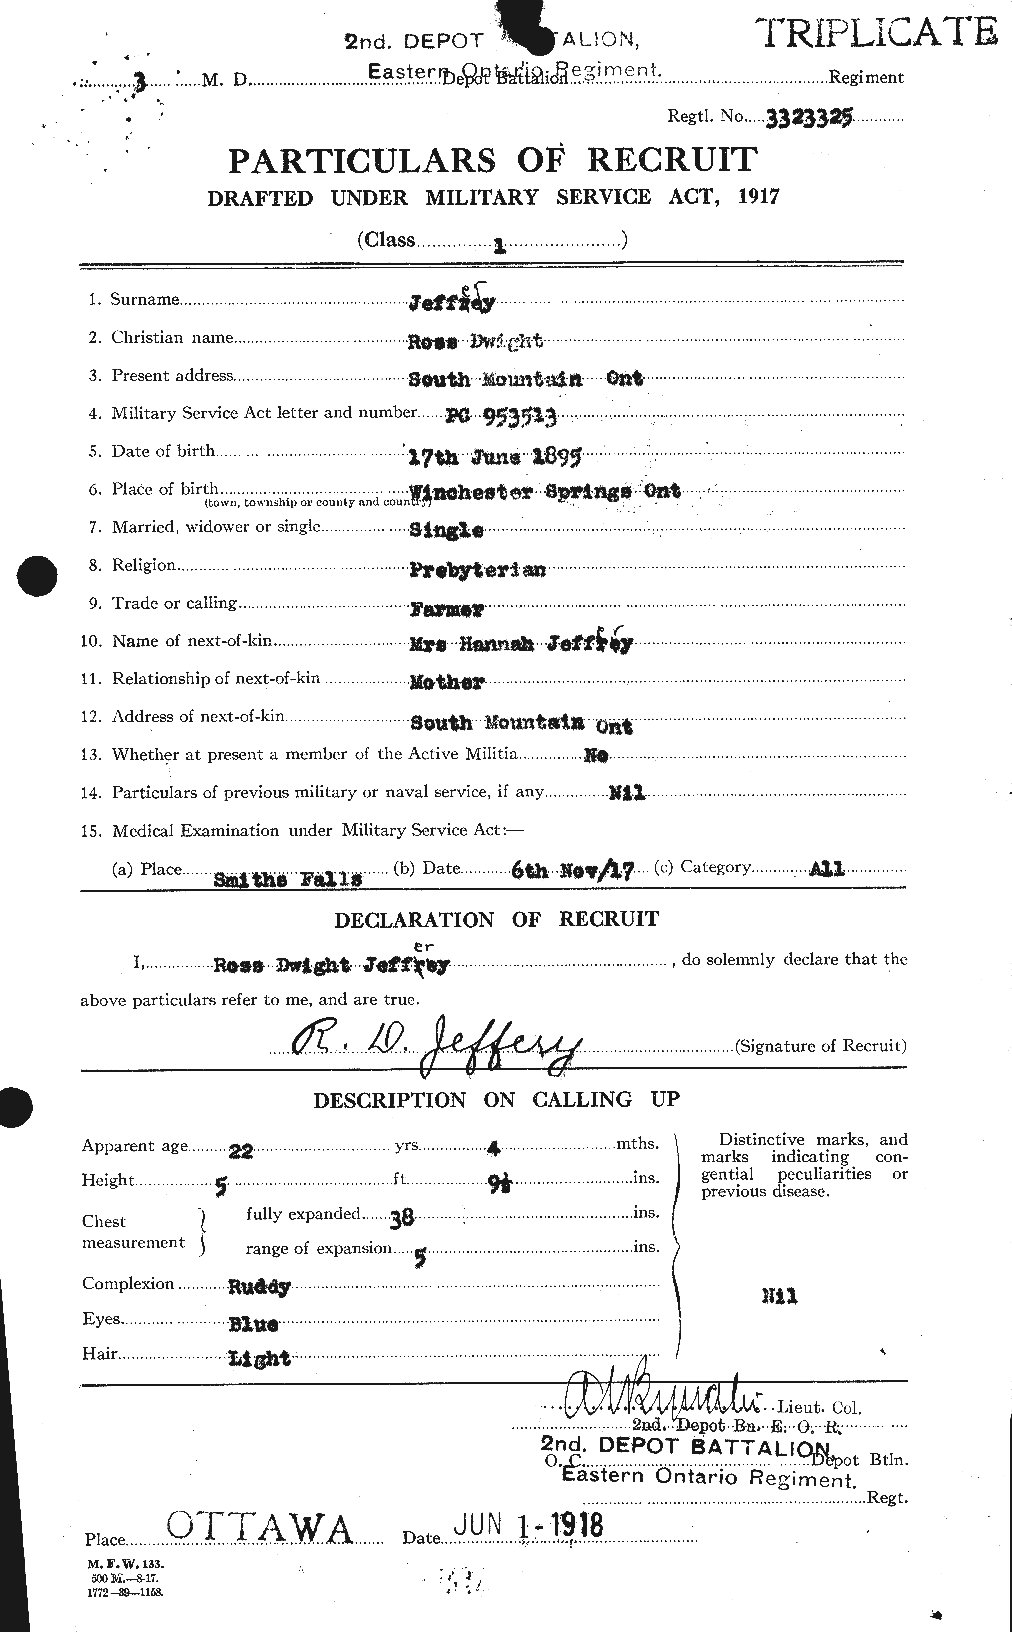 Personnel Records of the First World War - CEF 417798a